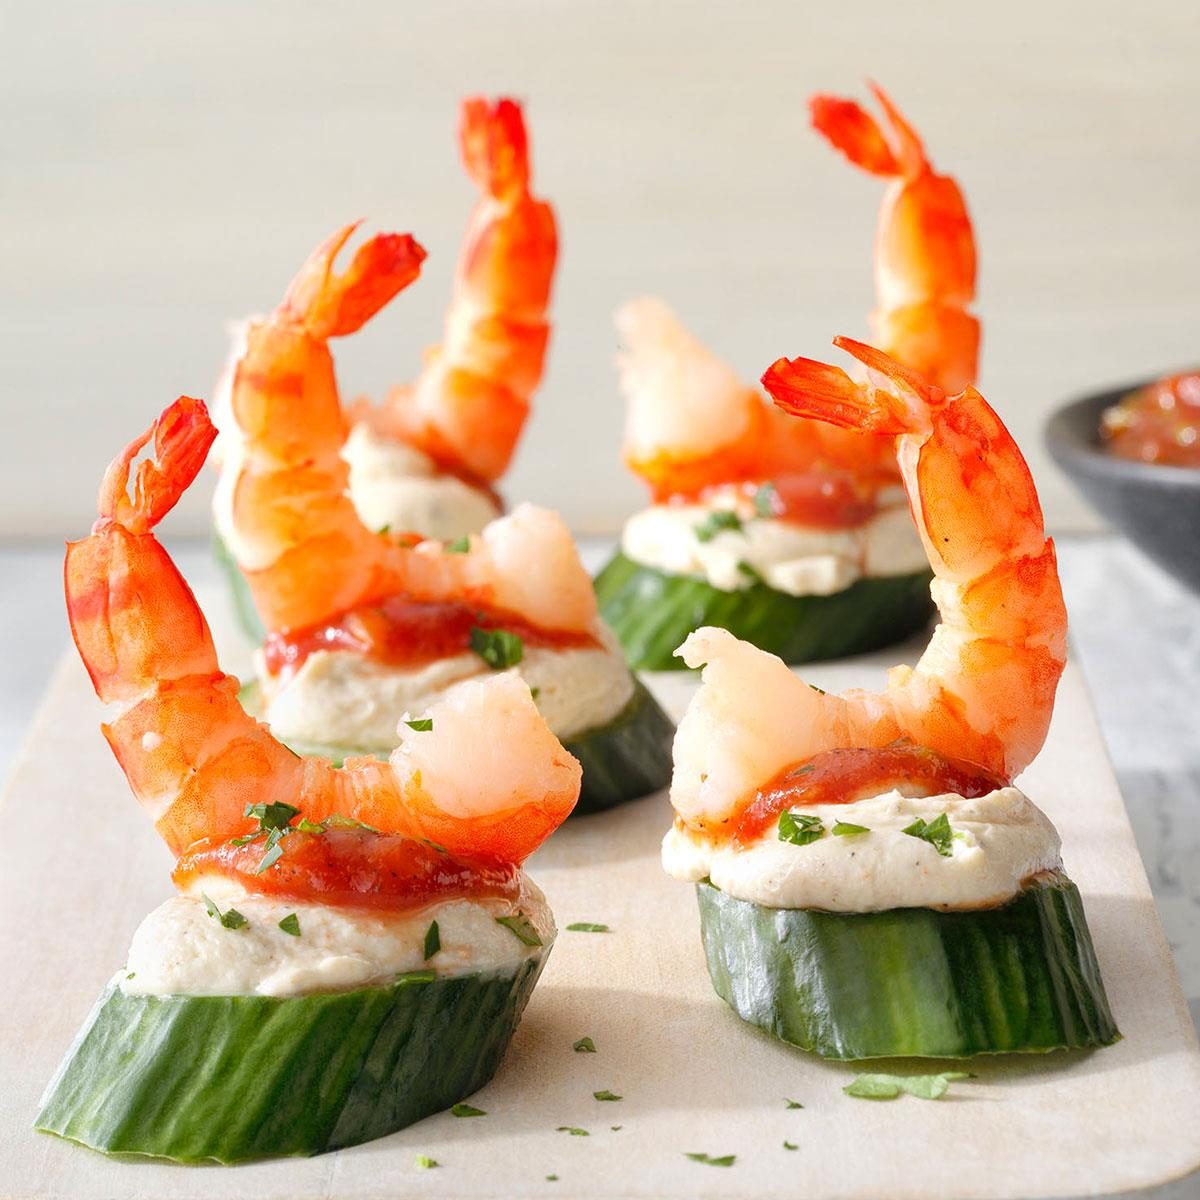 Shrimp And Cucumber Canapes Exps Hohbz23 112700 P1onp3 Md 06 28 14b